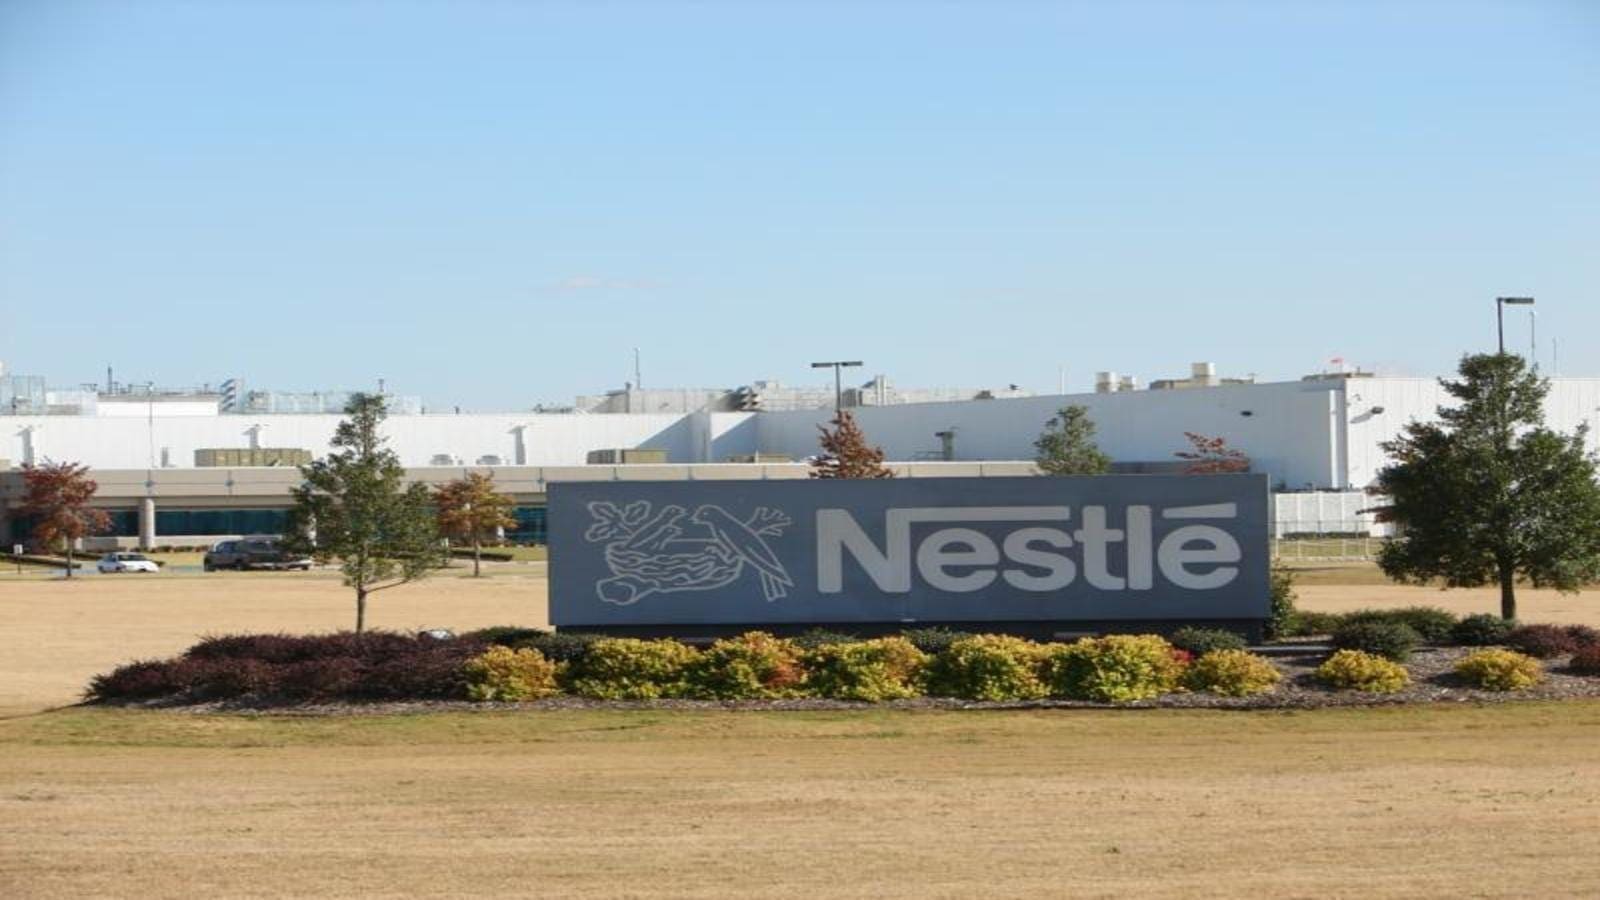 Swiss food giant Nestlé partners with Plug and Play to accelerate innovation in Indonesia